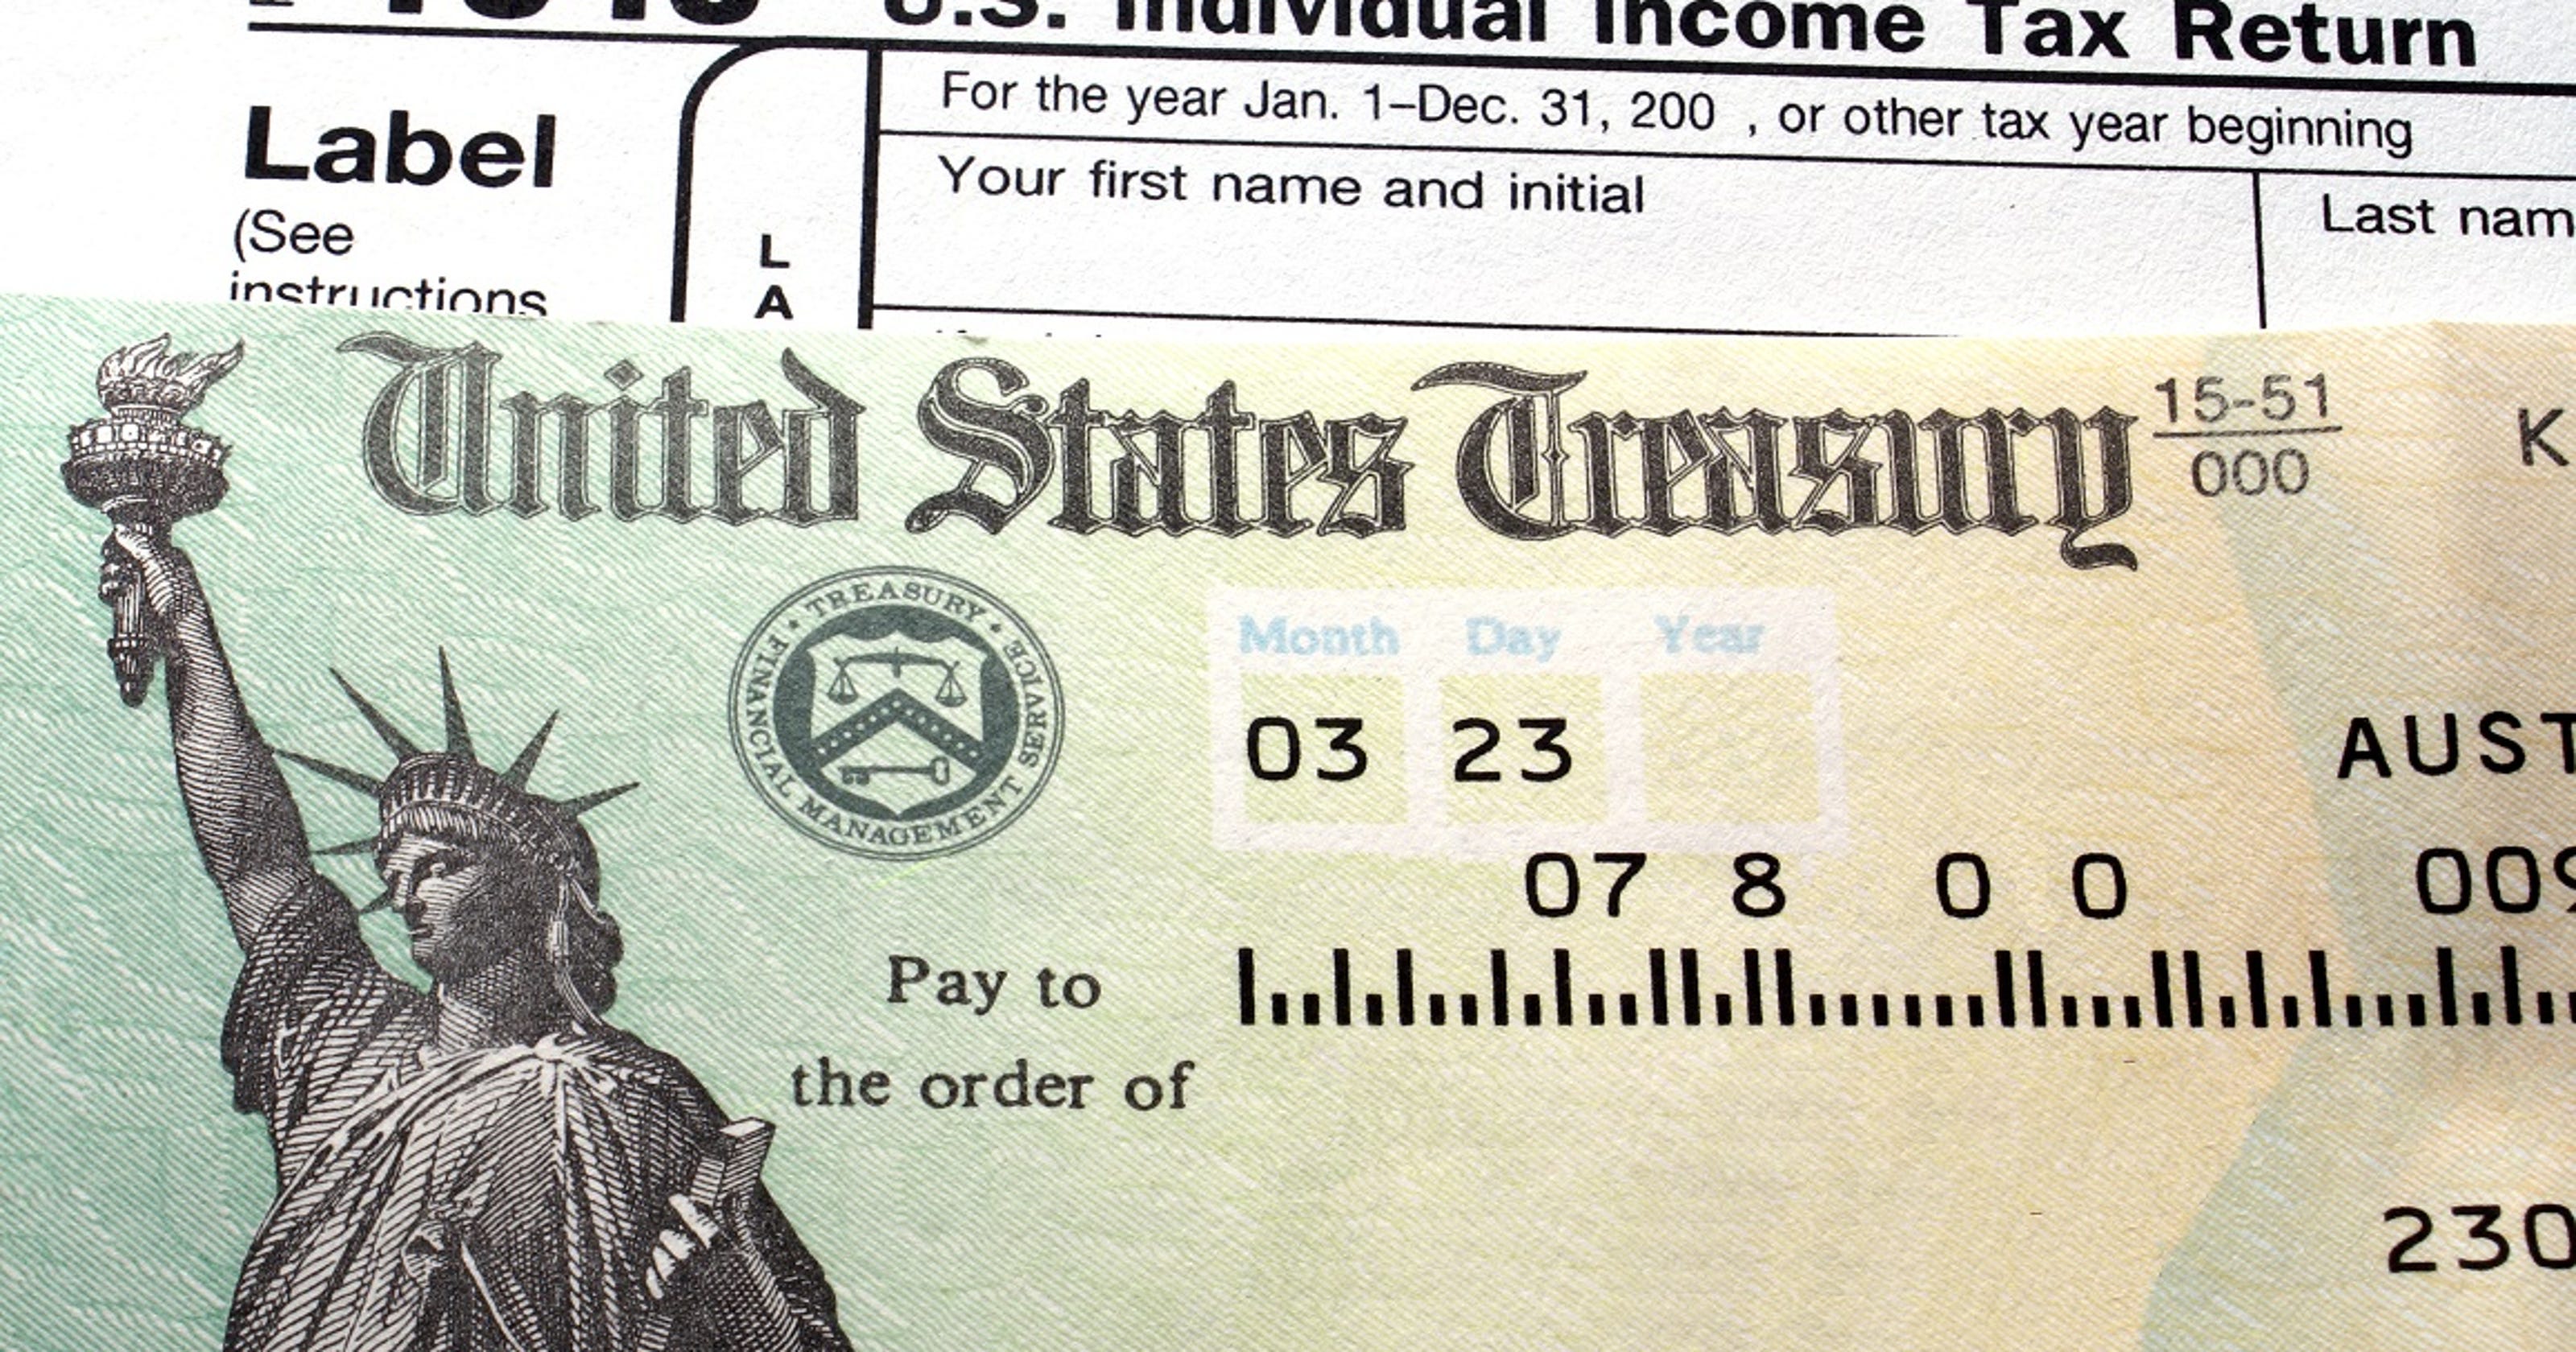 Tax refund 2019: Unexpected IRS bills burden some Americans&#39; budgets